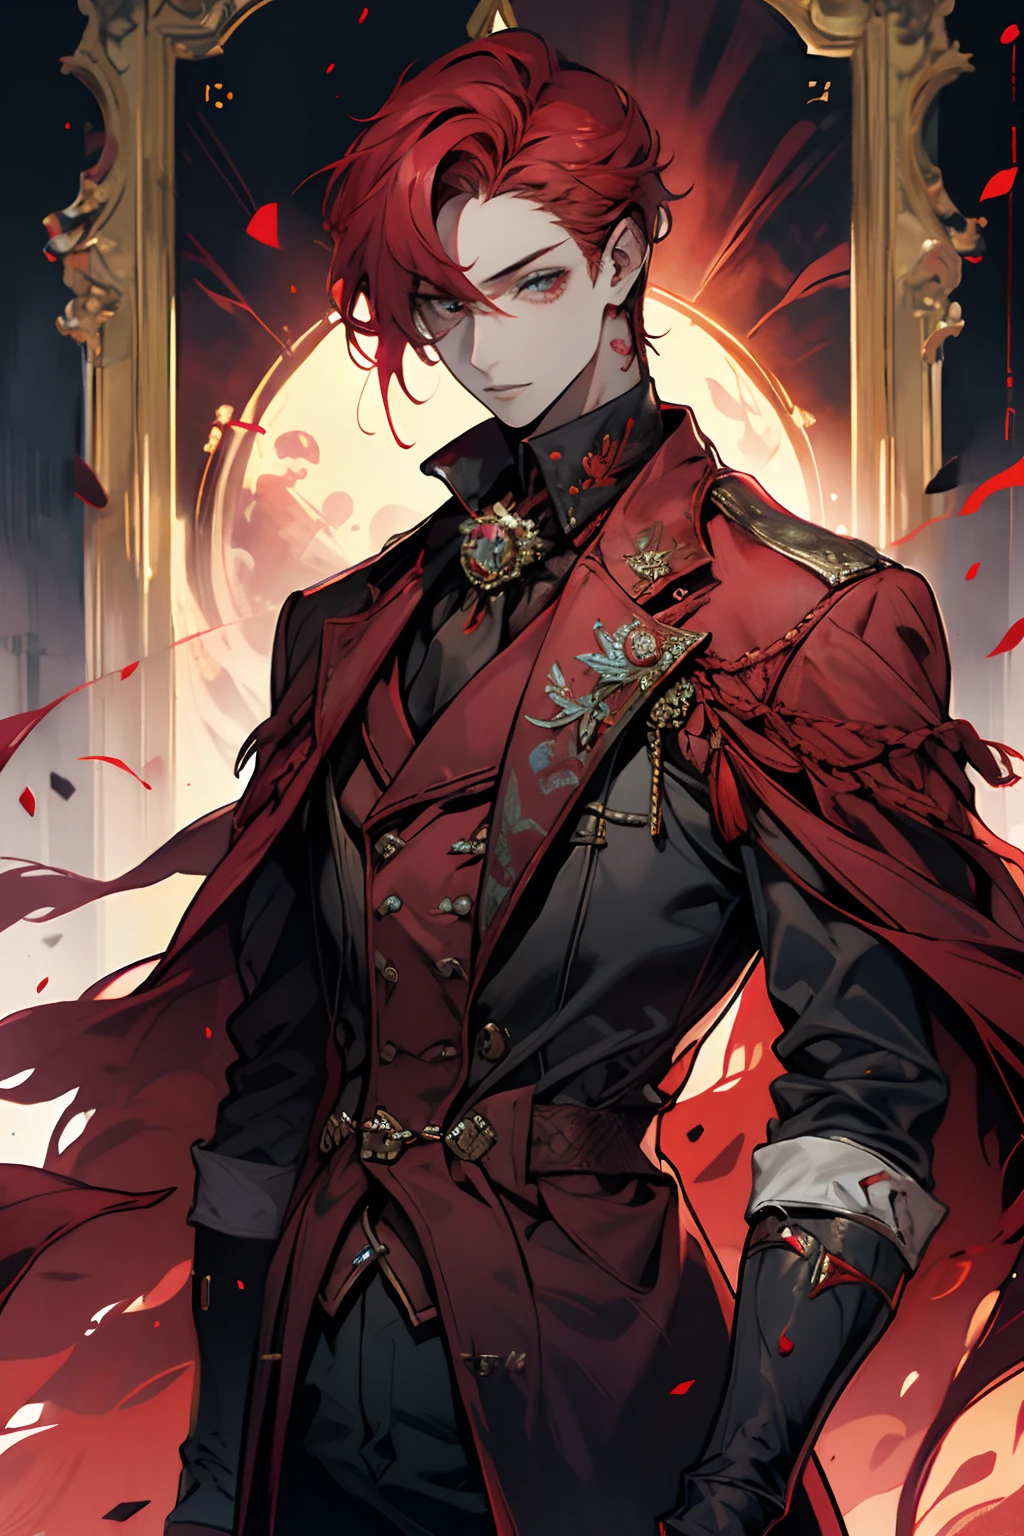 1 men, red hair, Black and red formal suit, Eyes red, blood magic, pointy ears